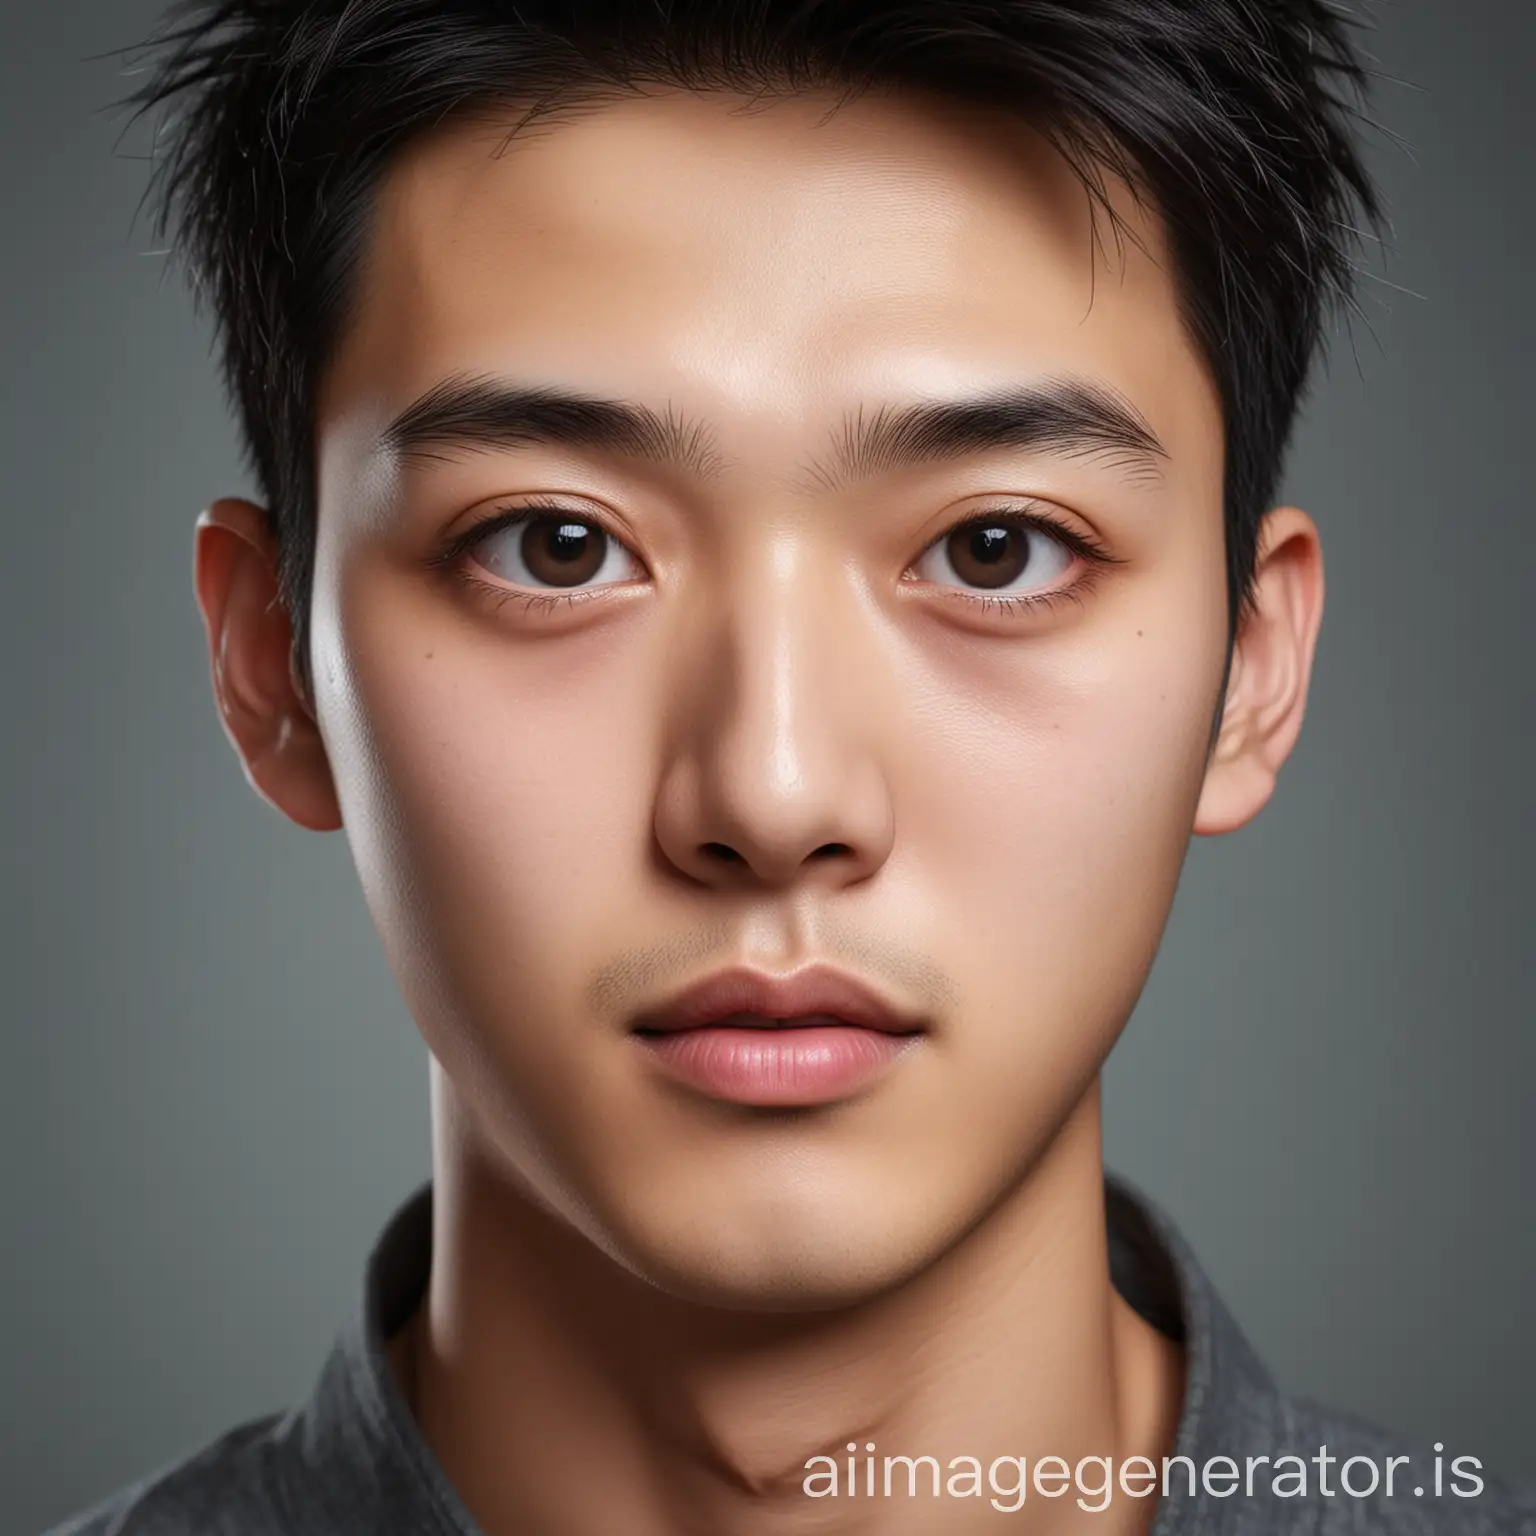 Portrait-of-a-Handsome-Chinese-Male-Youth-with-Distinctive-Facial-Features